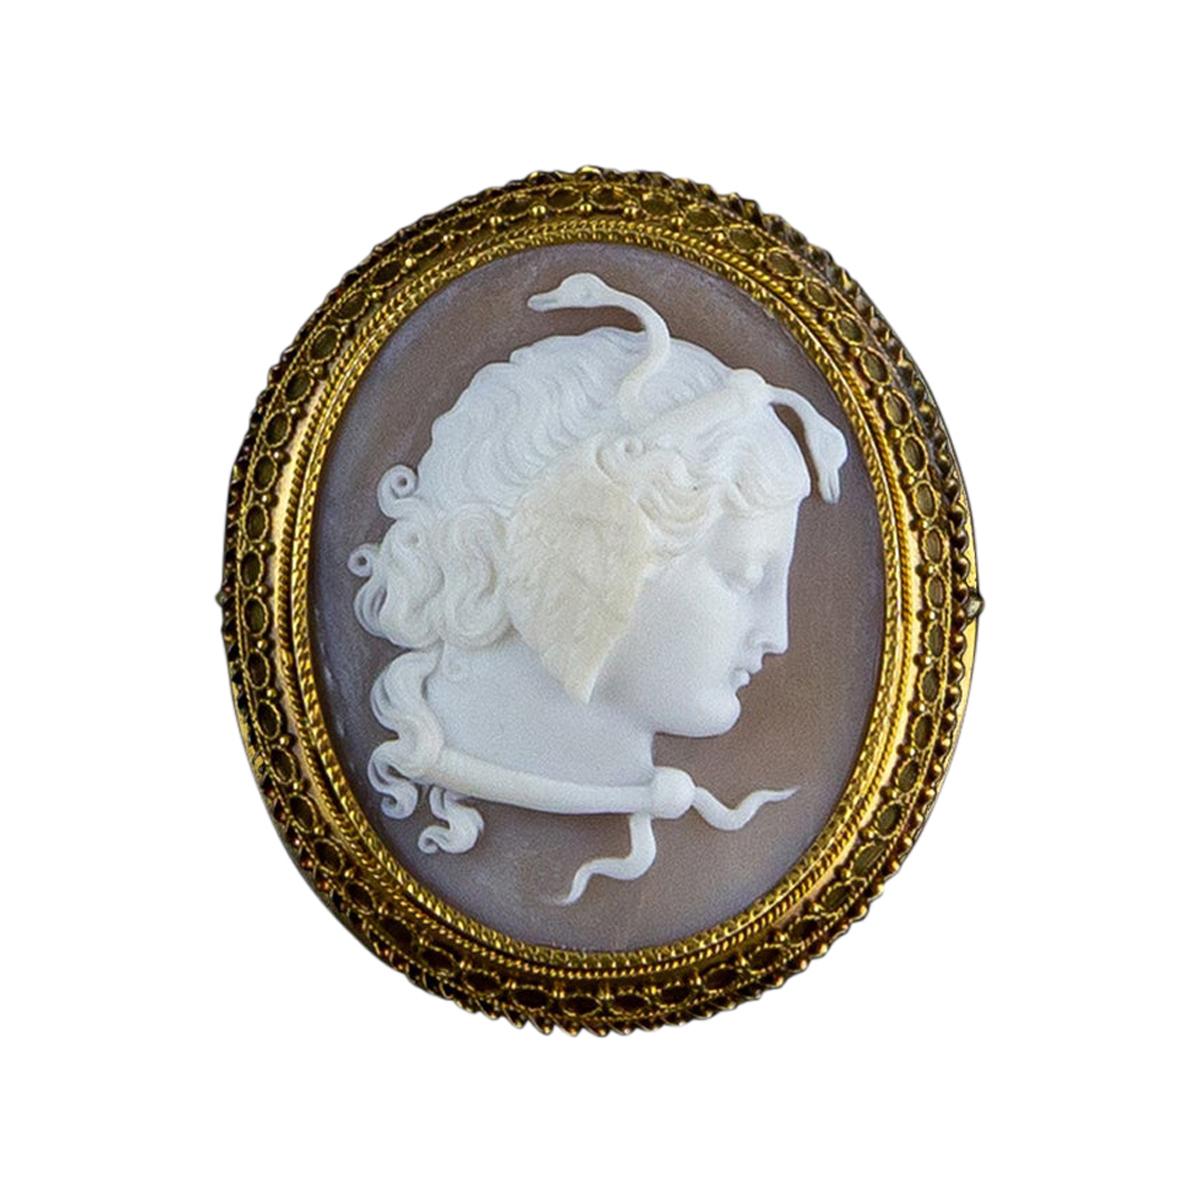 Mid 1800s 18 Kt Yellow Gold Antique Brooch with Shell Cameo Depicting “Medusa” For Sale